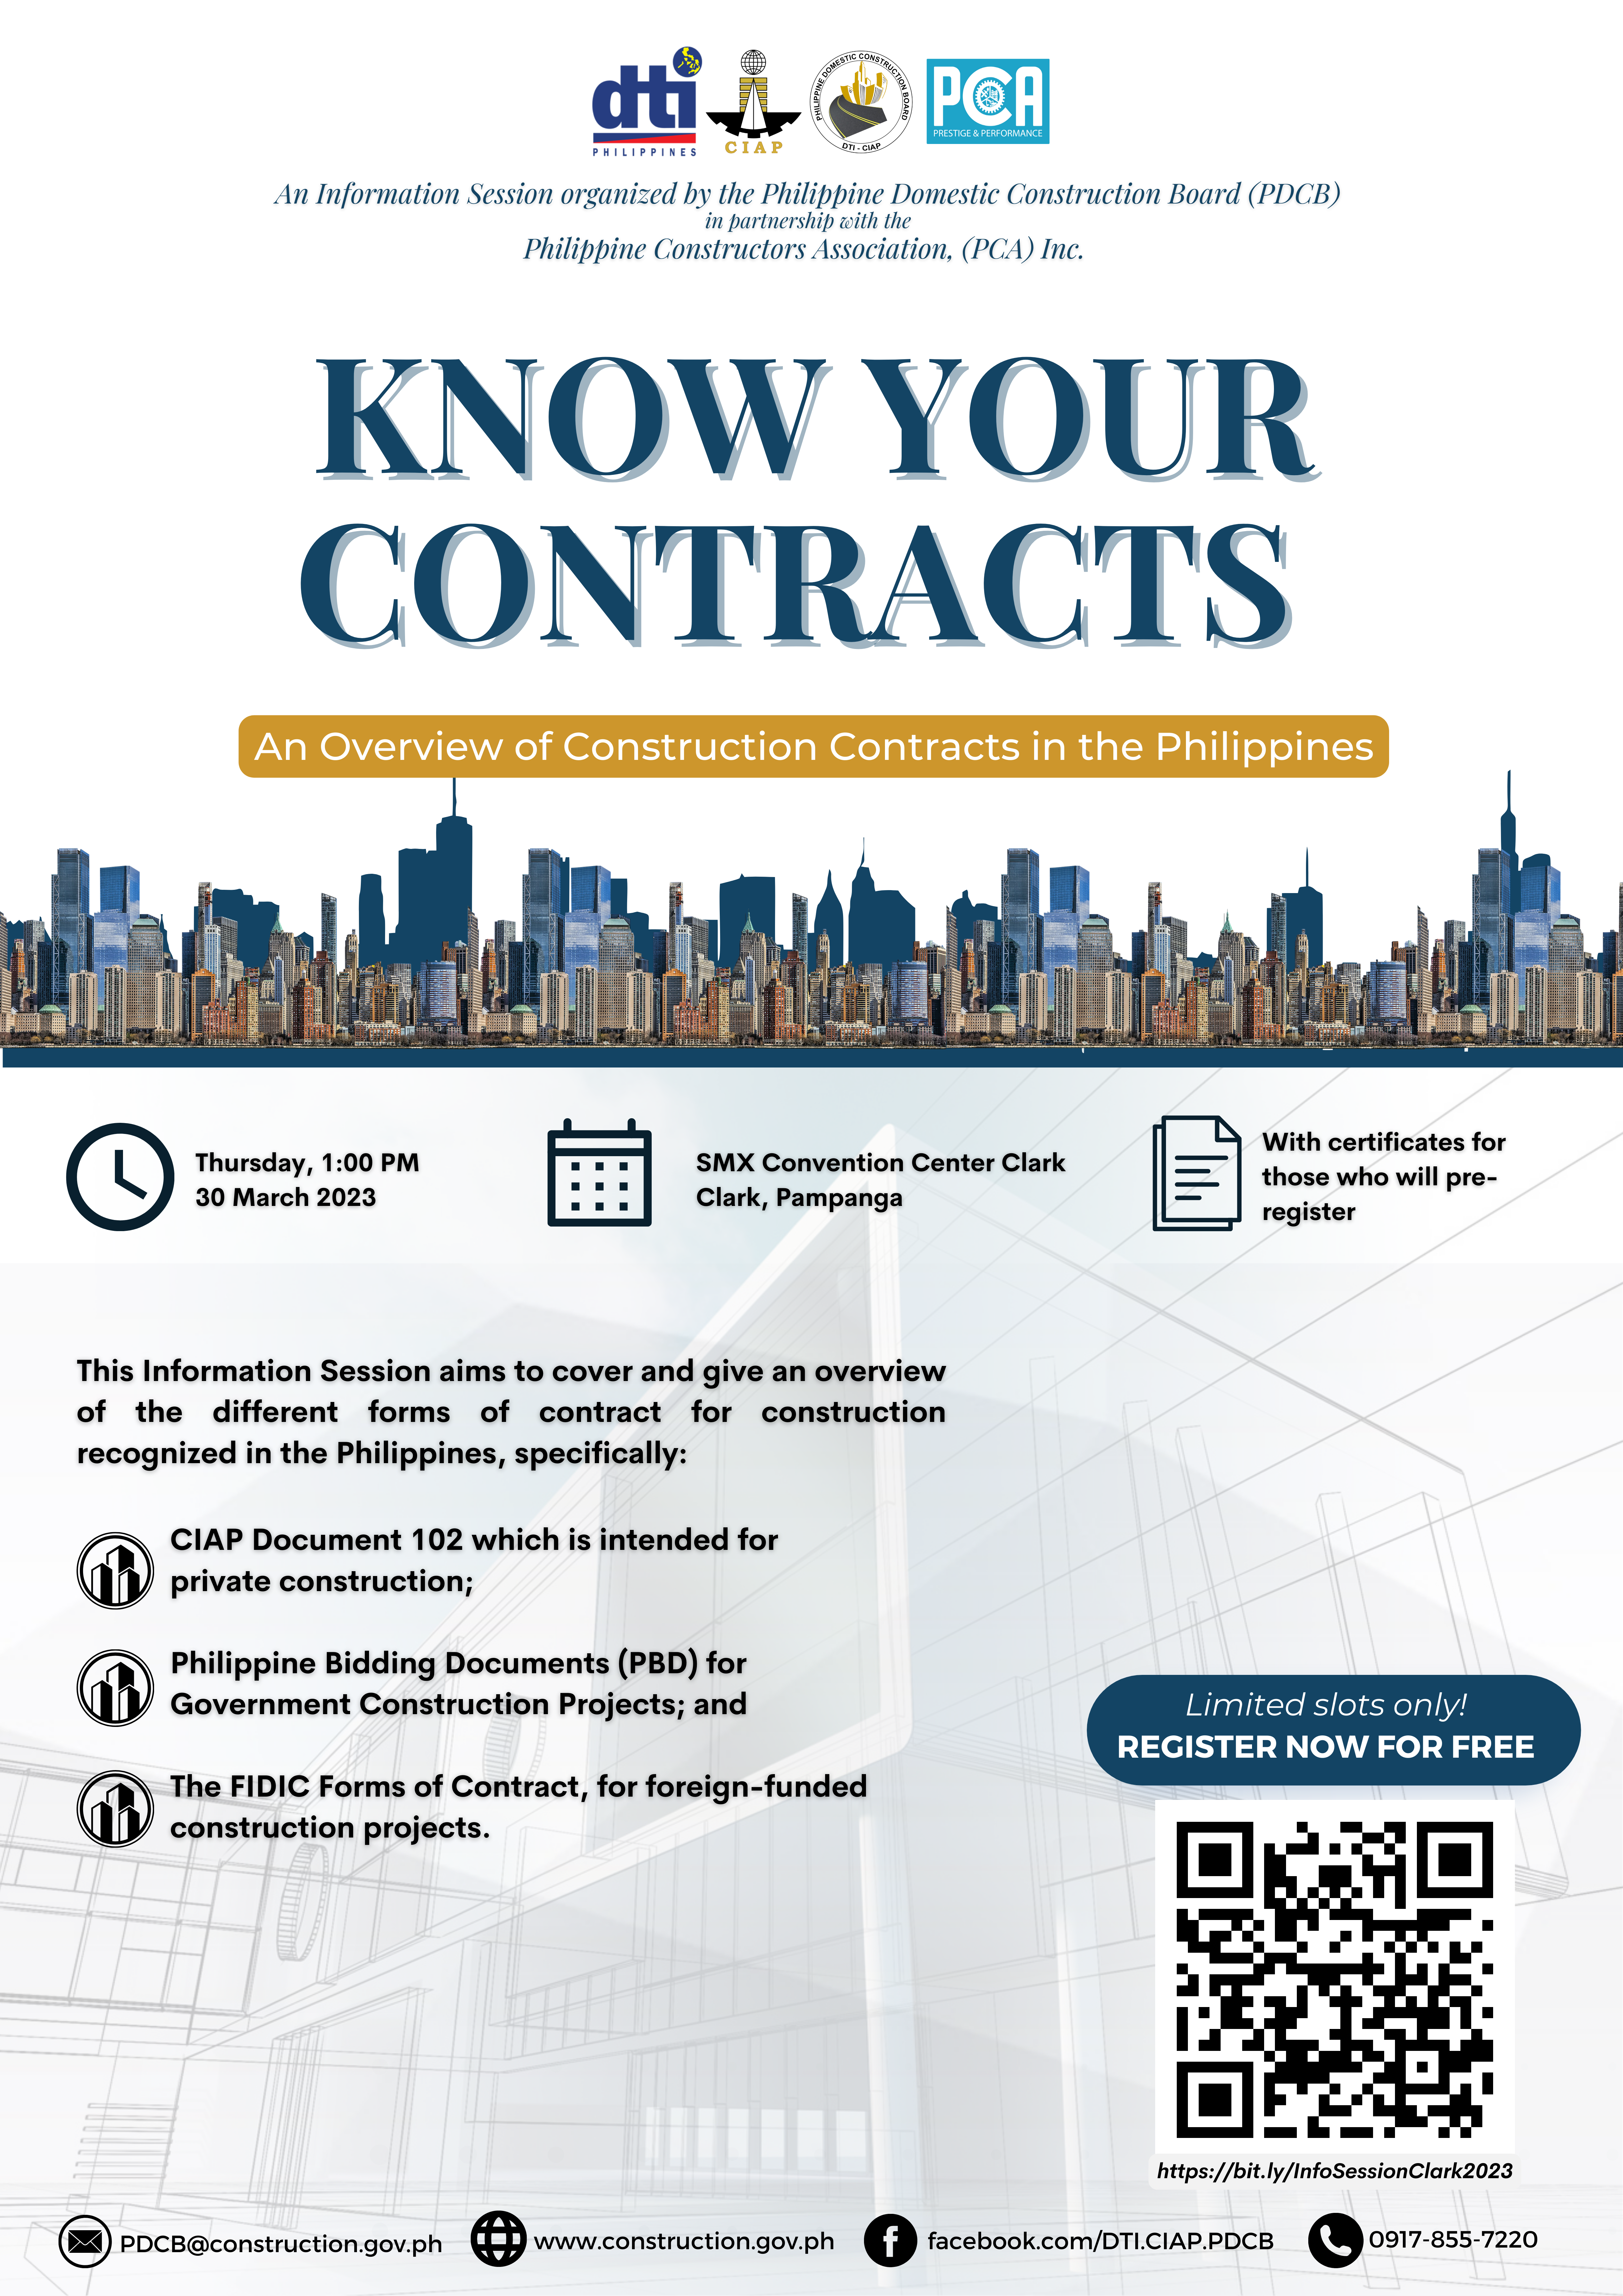 YOU ARE INVITED! Register now to the “Know Your Contracts: An Overview of Construction Contracts in the Philippines”